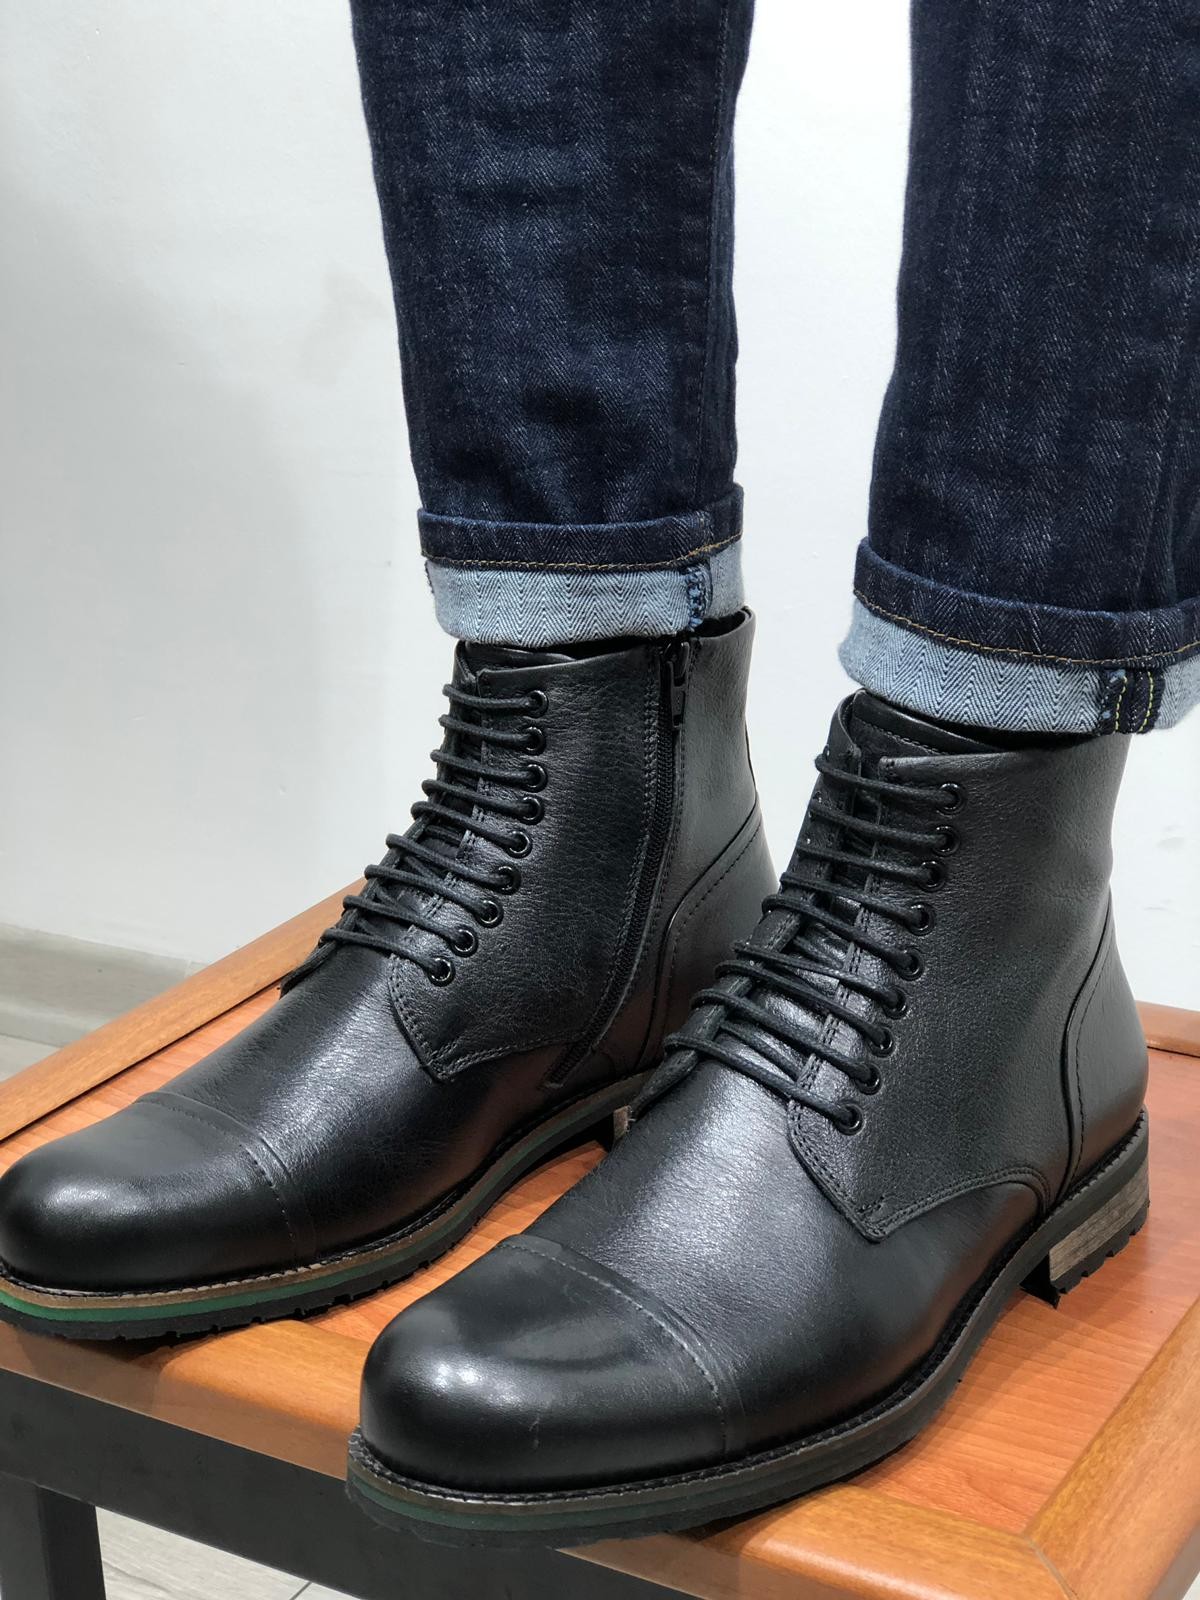 Buy Black Calf Leather Military Boot by Gentwith.com with Free Shipping